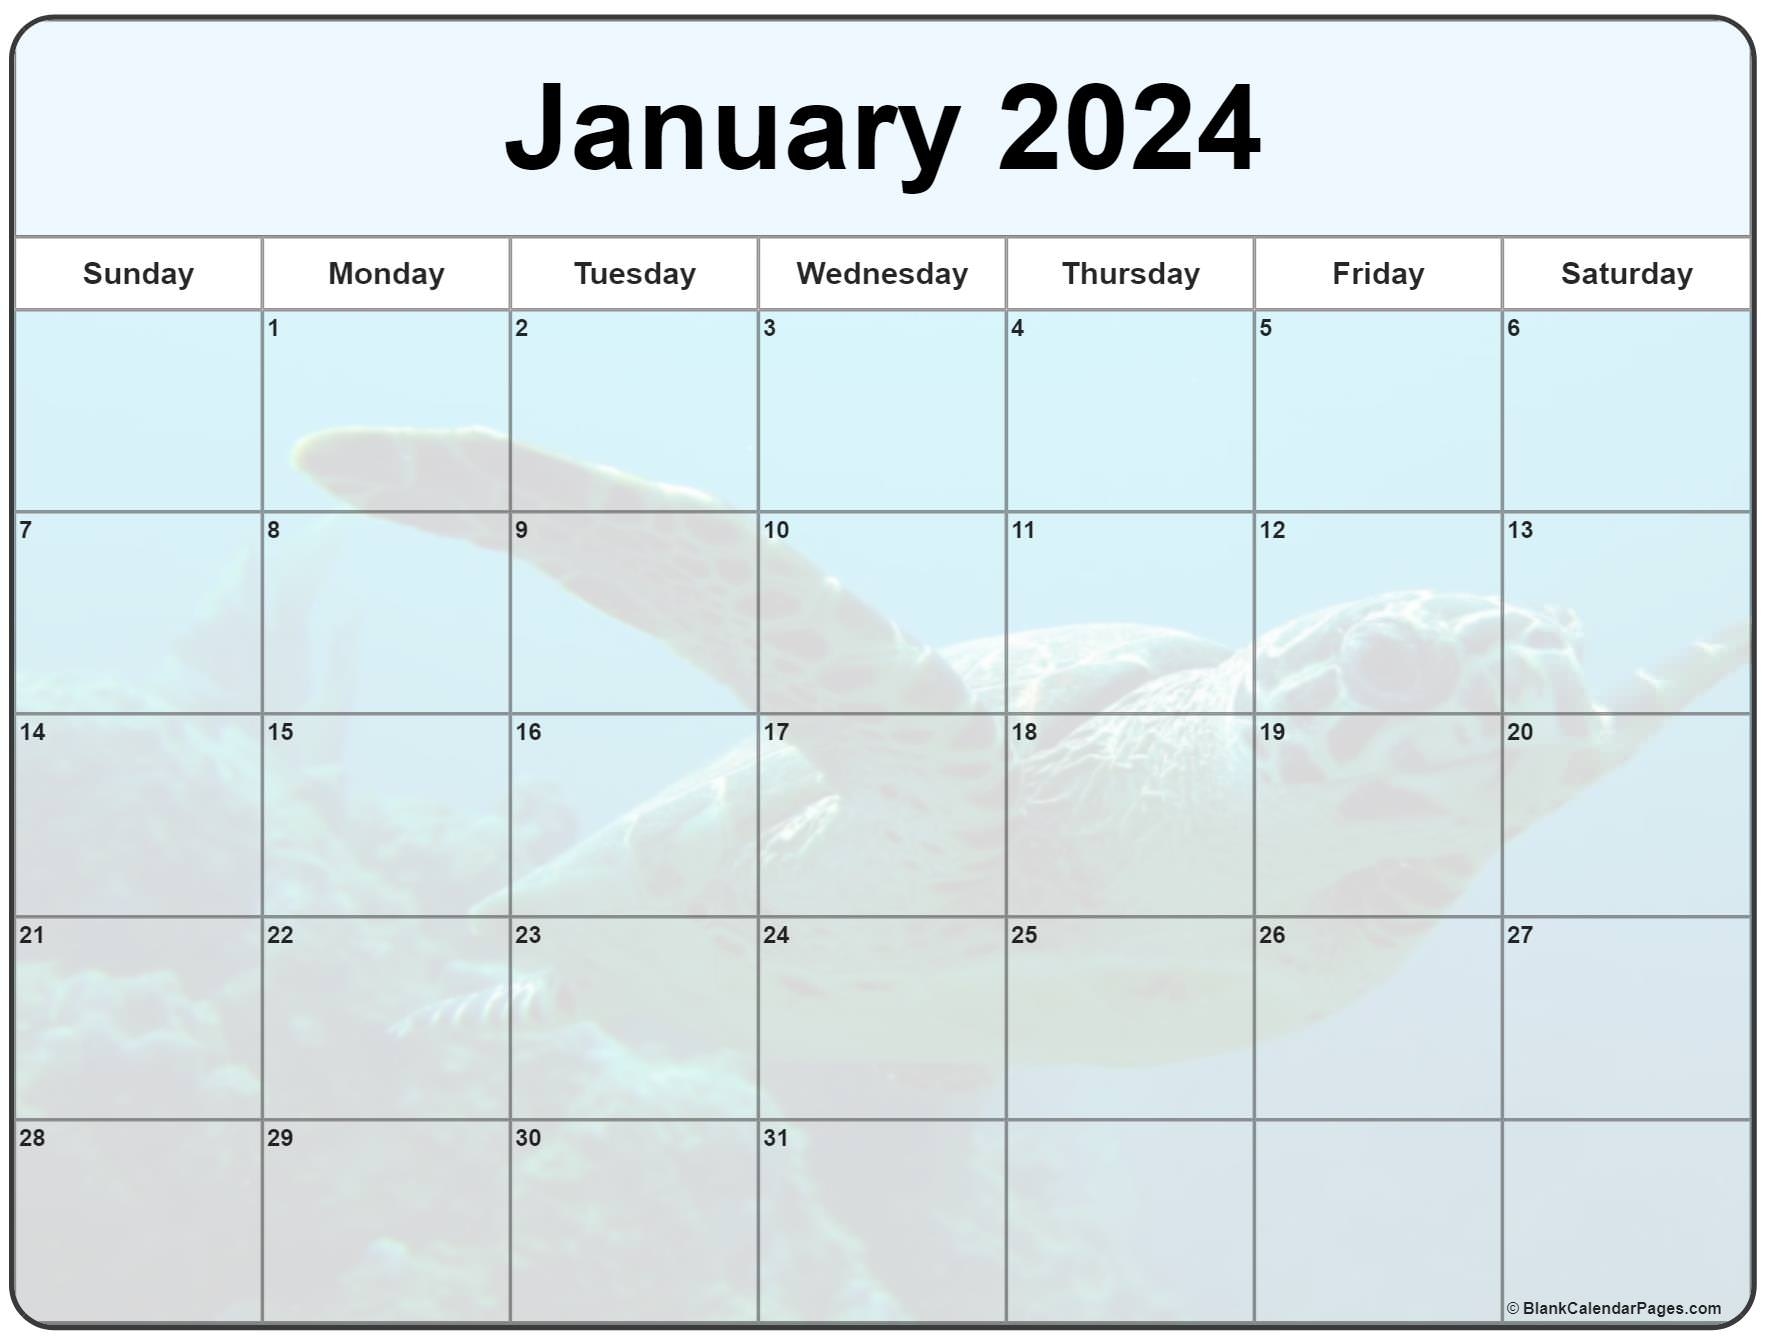 Collection Of January 2024 Photo Calendars With Image Filters. throughout Free Printable Calendar 2024 Wiki Calendar